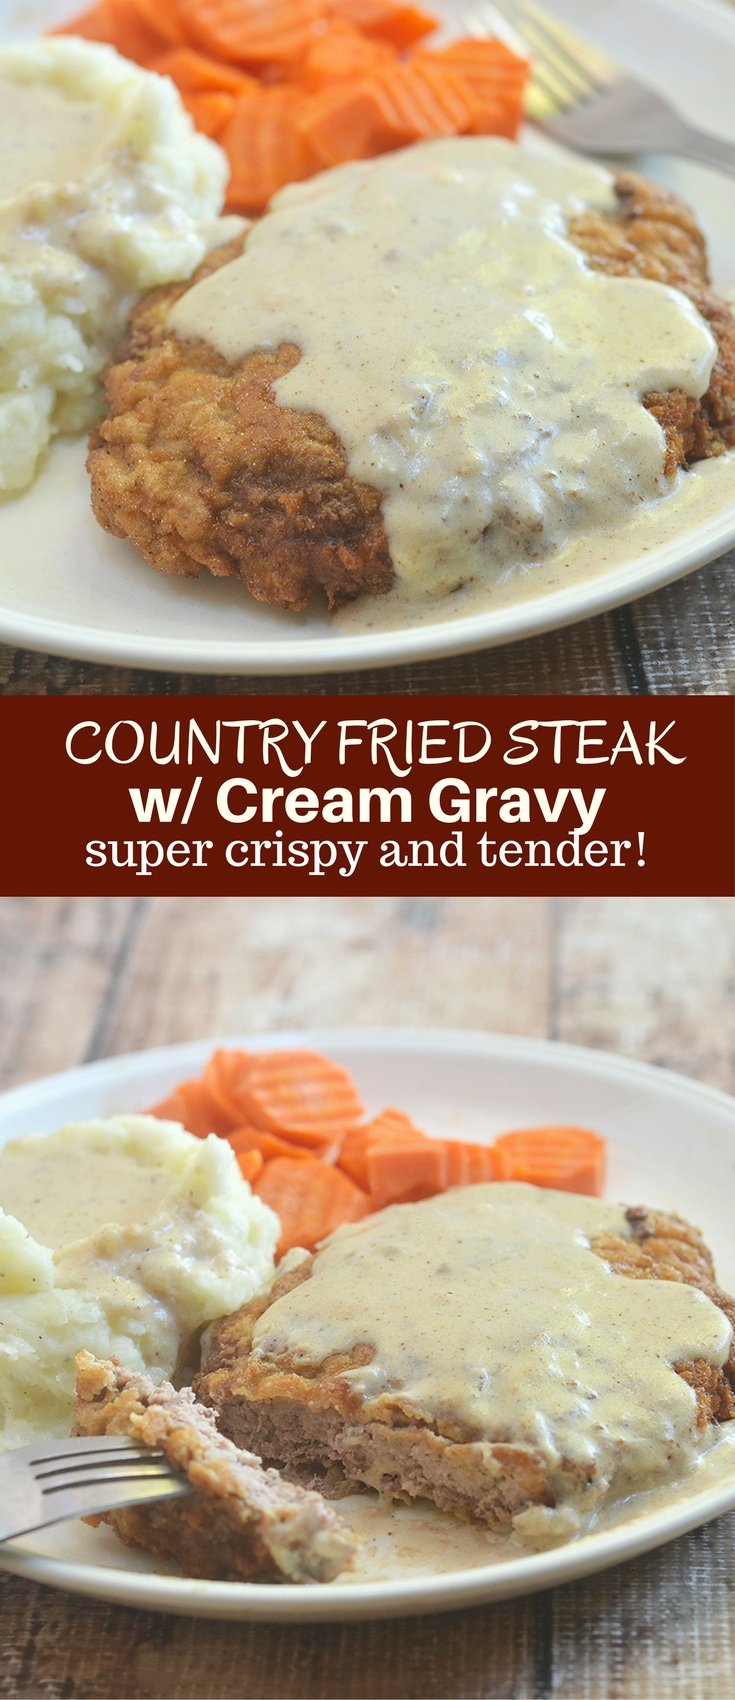 Country Fried Steak with Creamy Gravy made crispy, super tender and tasty using a buttermilk marinade. Hearty and delicious with a flavorful milk gravy, it is the ultimate comfort food.